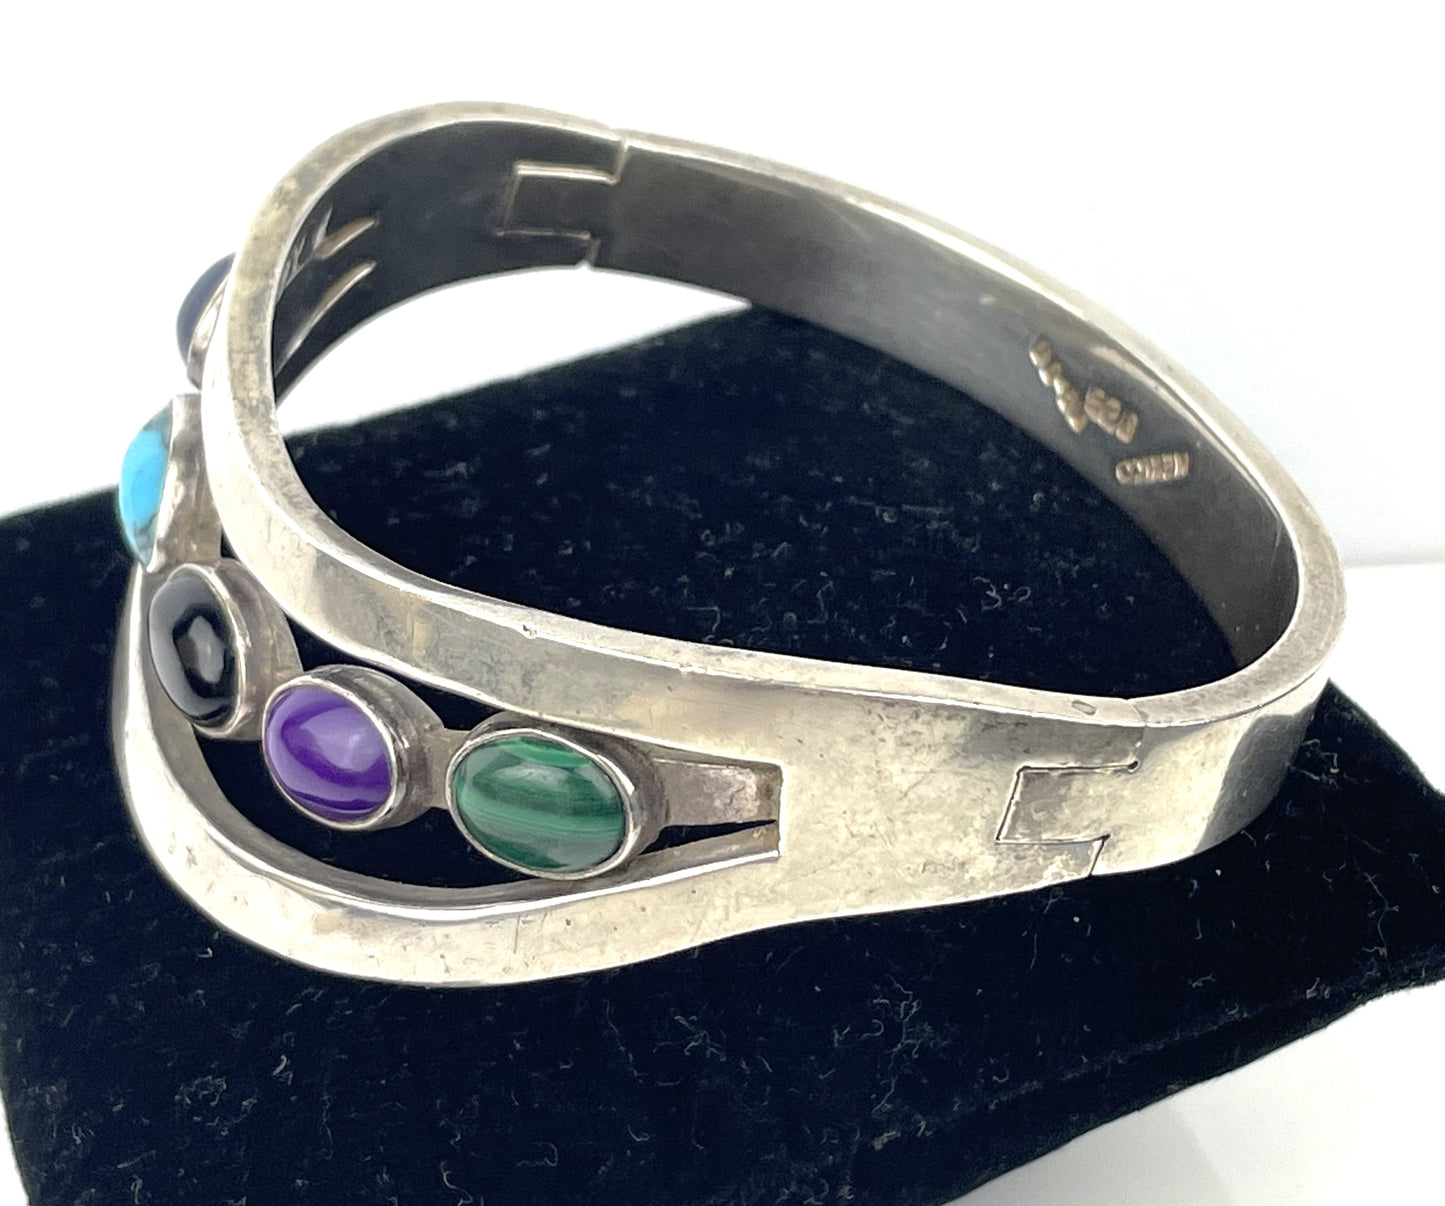 Vintage Mexican Sterling Silver & Semi Precious Stone Cut-Out Cuff Bracelet